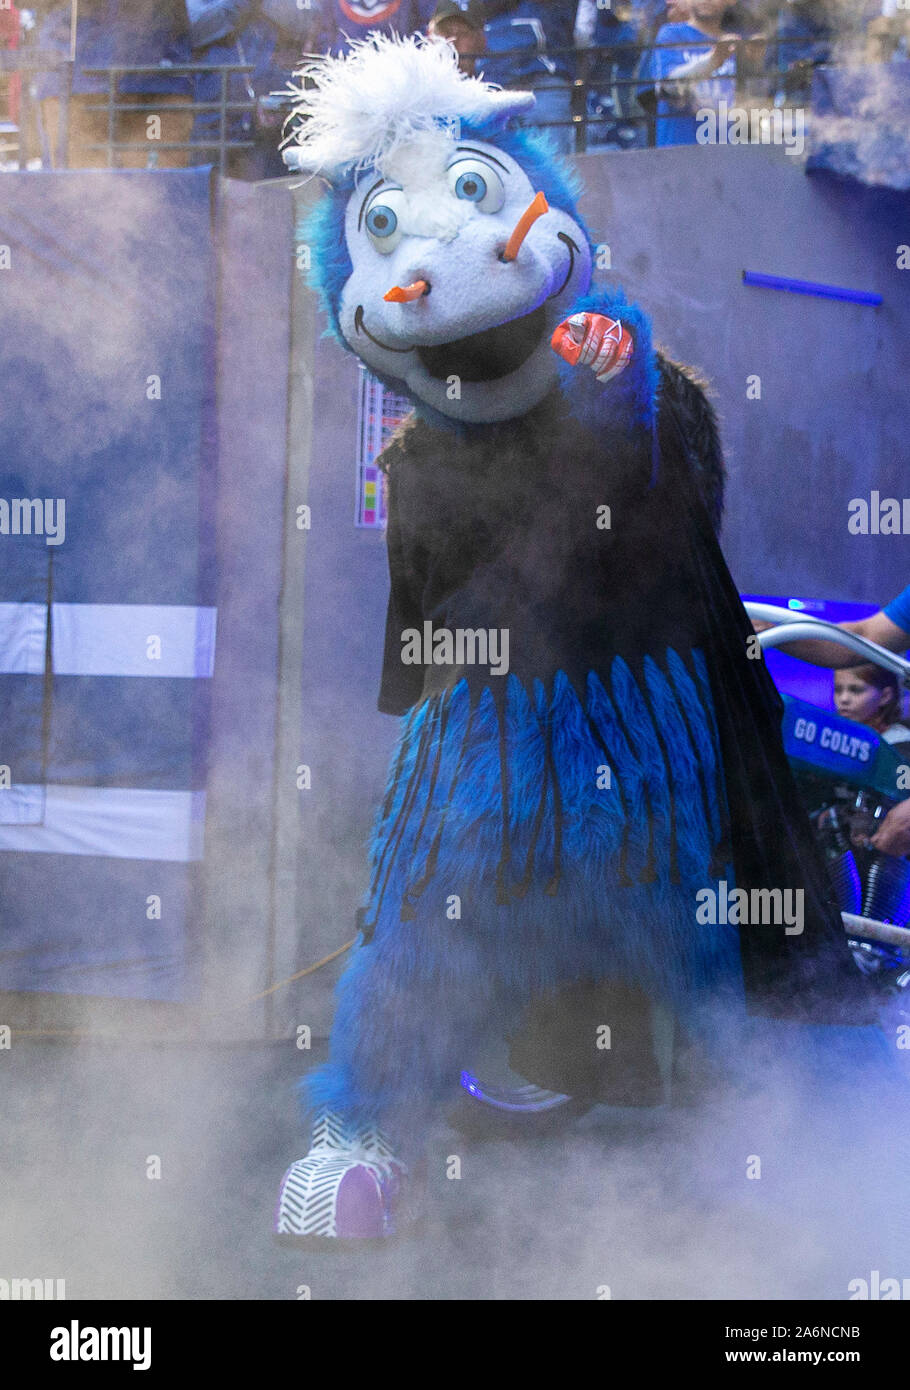 Indianapolis, Indiana, USA. 27th Oct, 2019. Indianapolis Colts mascot Blue during NFL football game action between the Denver Broncos and the Indianapolis Colts at Lucas Oil Stadium in Indianapolis, Indiana. Indianapolis defeated Denver 15-13. John Mersits/CSM/Alamy Live News Stock Photo